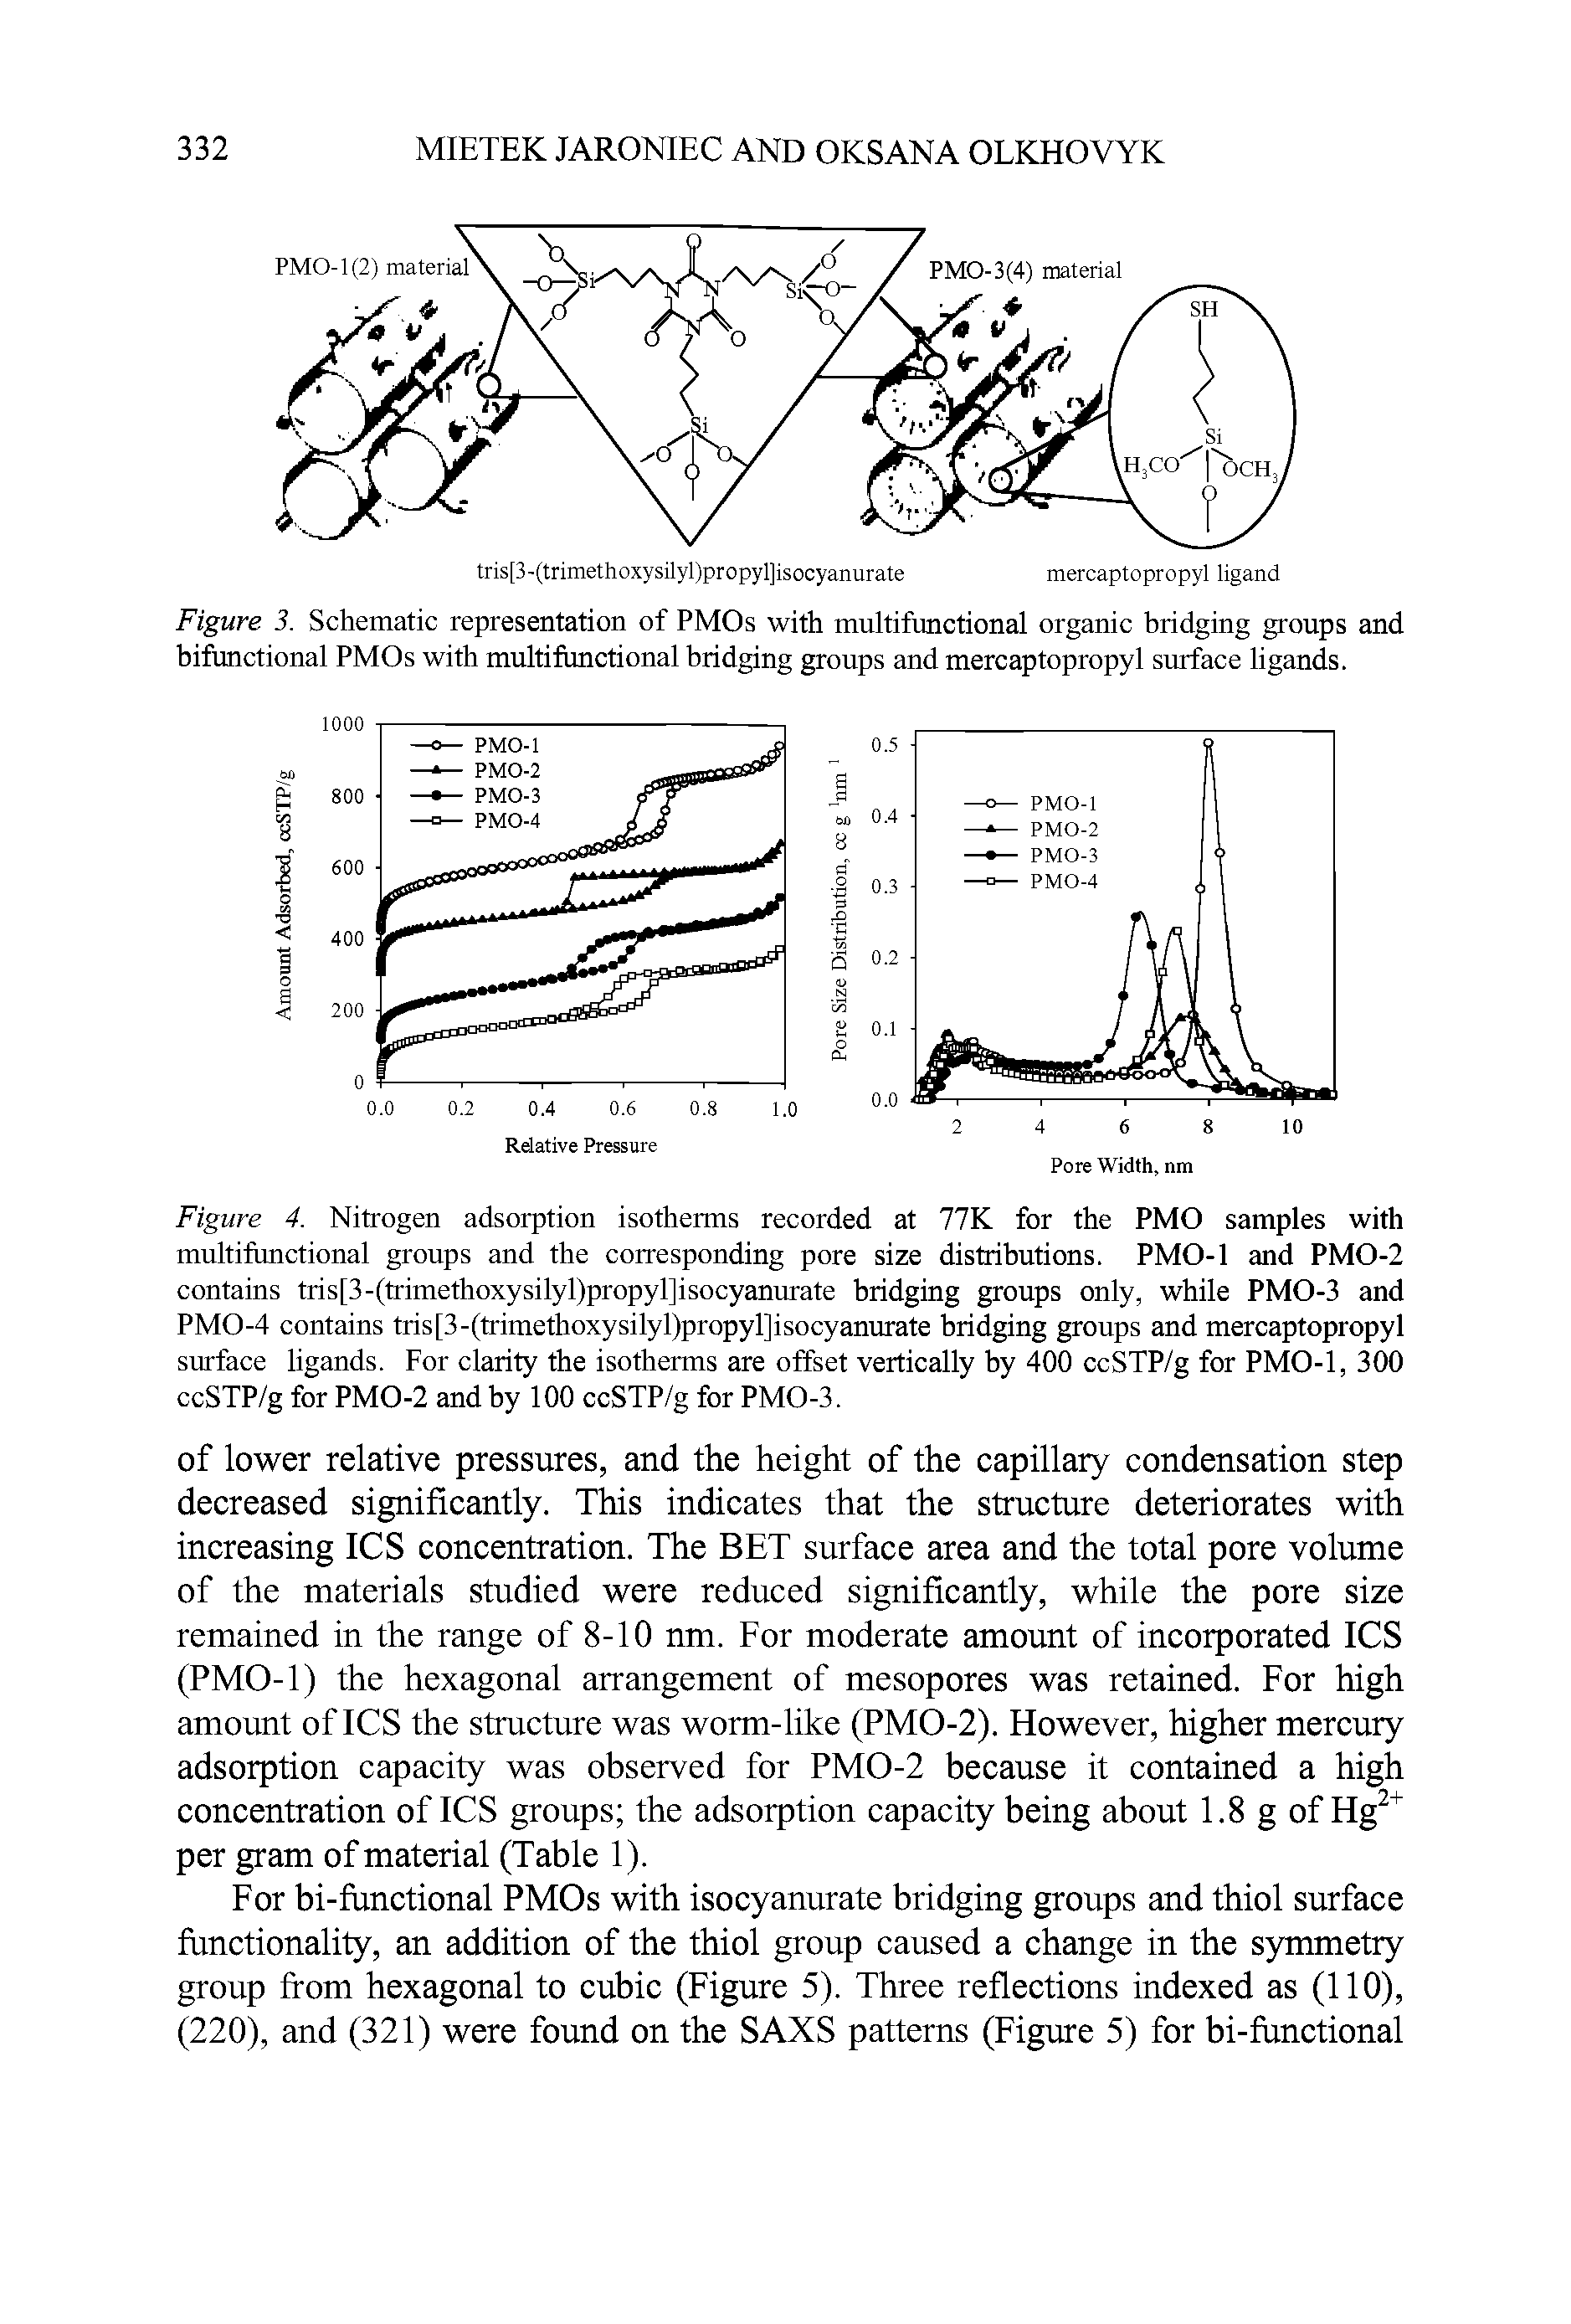 Figure 4. Nitrogen adsorption isotherms recorded at 77K for the PMO samples with multifunctional groups and the corresponding pore size distributions. PMO-1 and PMO-2 contains tris[3-(trimethoxysilyl)propyl]isocyanurate bridging groups only, while PMO-3 and PMO-4 contains tris[3-(trimethoxysilyl)propyl]isocyanurate bridging groups and mercaptopropyl surface ligands. For clarity the isotherms are offset vertically by 400 ccSTP/g for PMO-1, 300 ccSTP/g for PMO-2 and by 100 ccSTP/g for PMO-3.